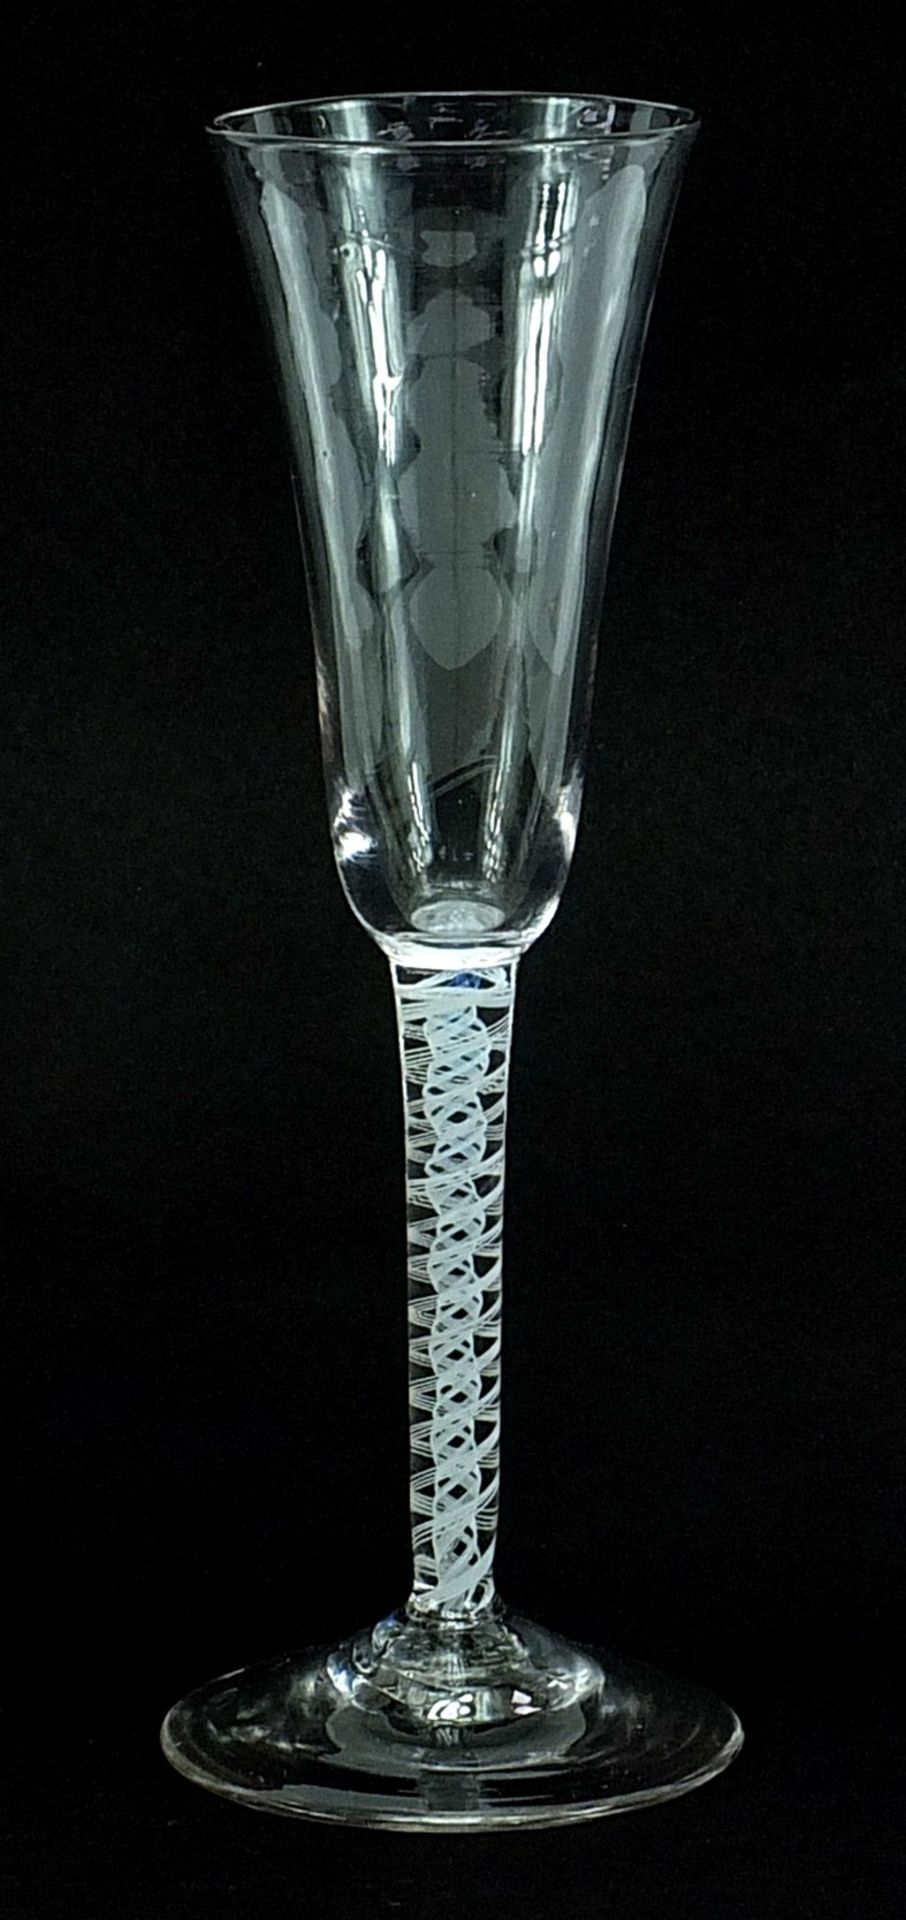 18th century wine glass with multiple opaque twist stem, 19cm high - Image 2 of 3